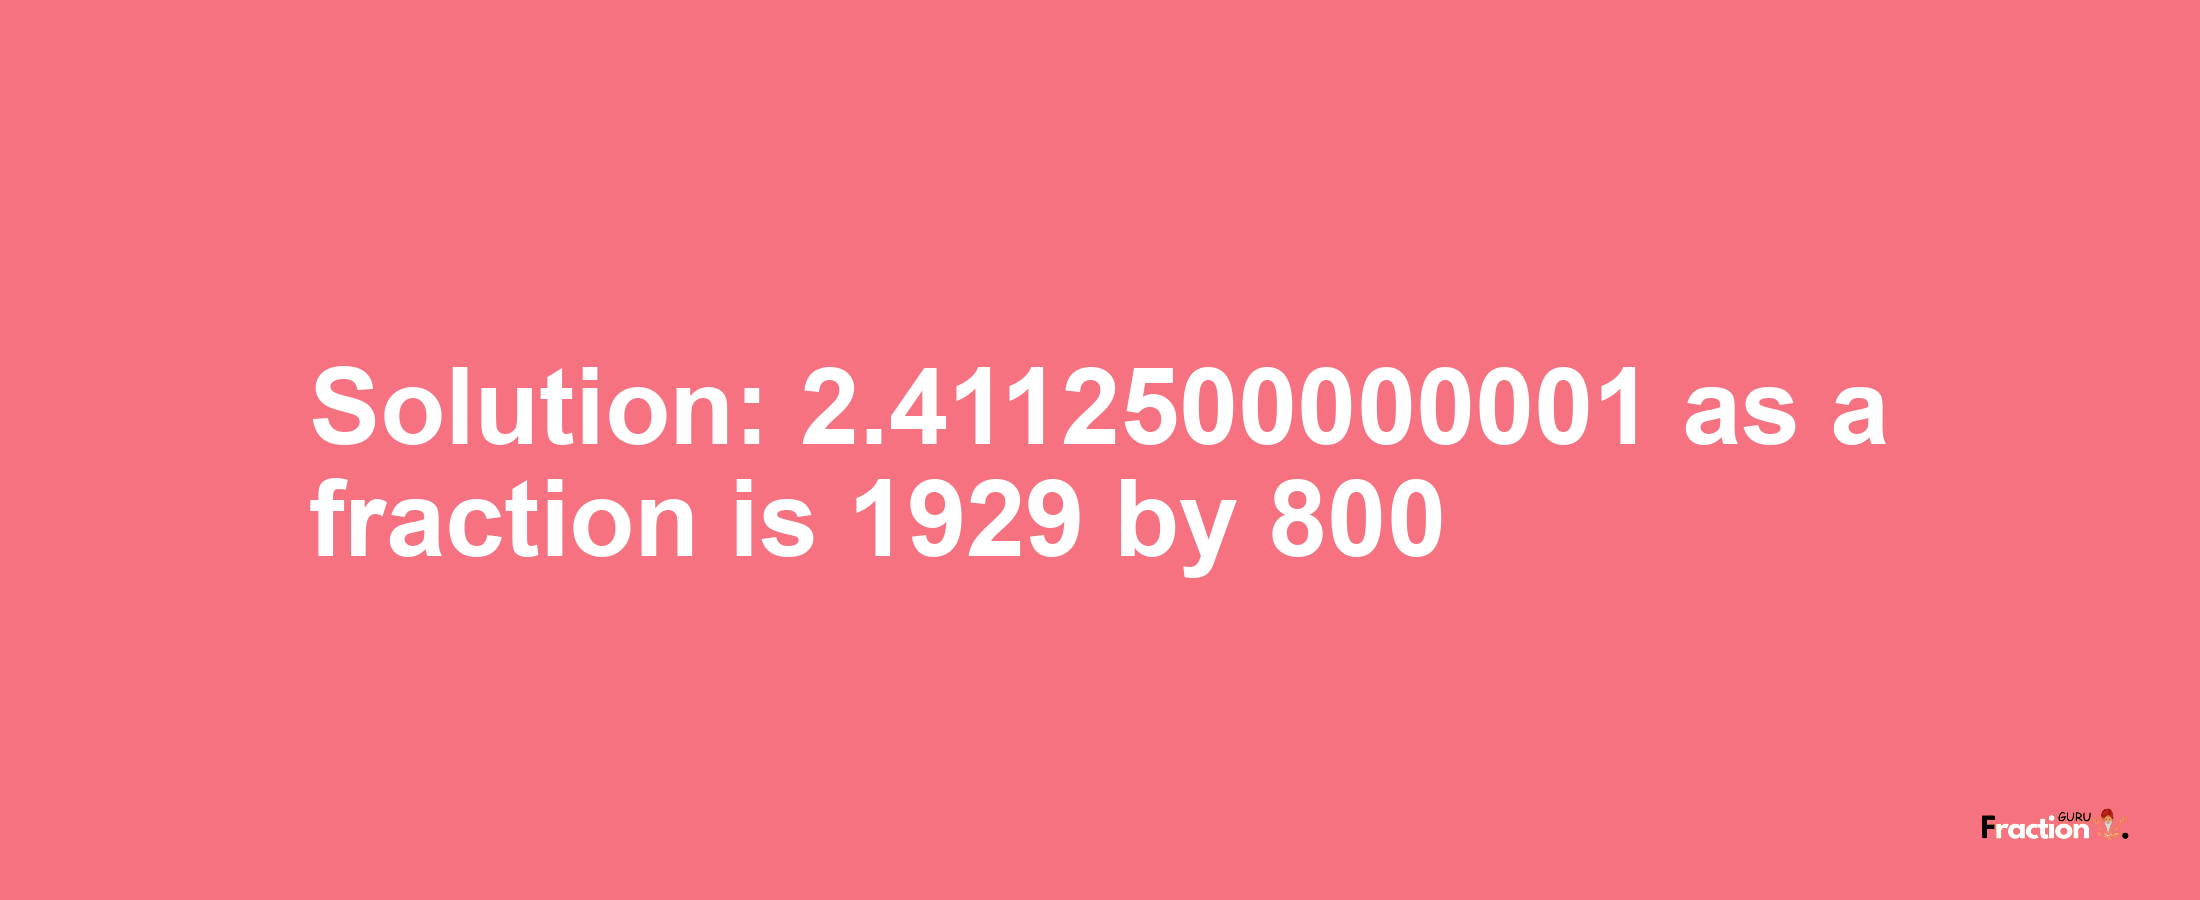 Solution:2.4112500000001 as a fraction is 1929/800